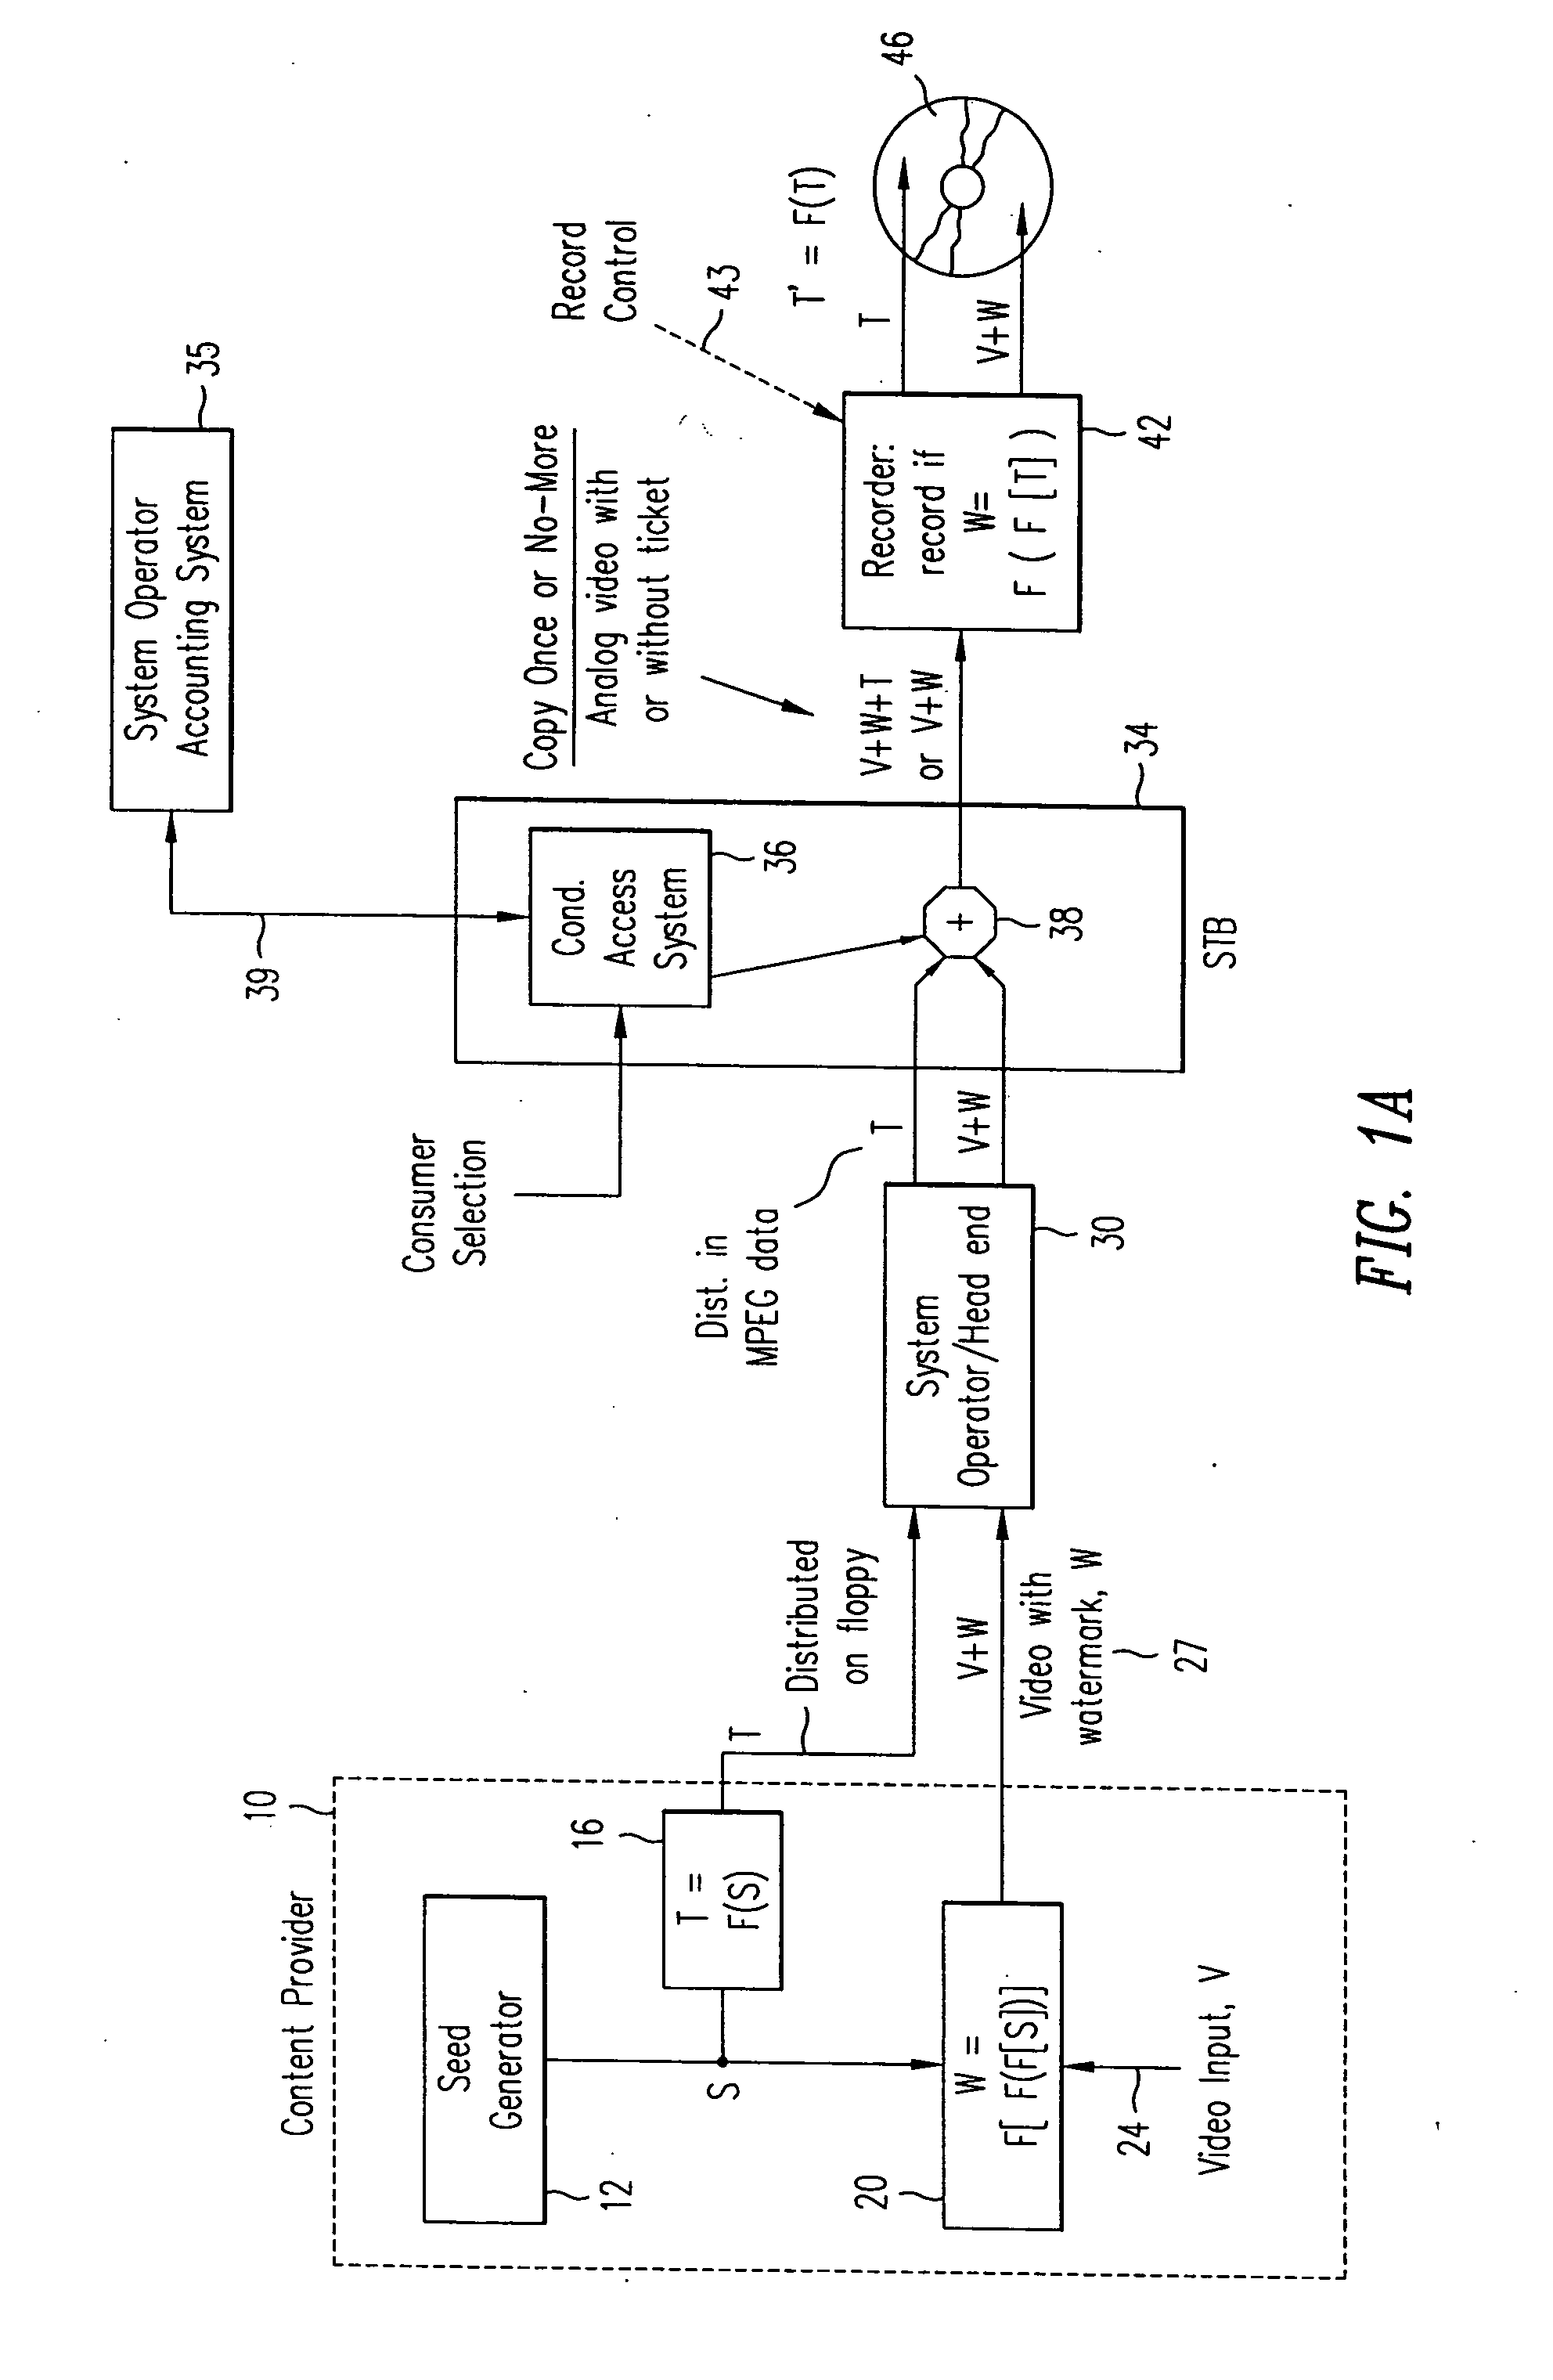 Method and apparatus for enhanced audio/video services with two watermarks